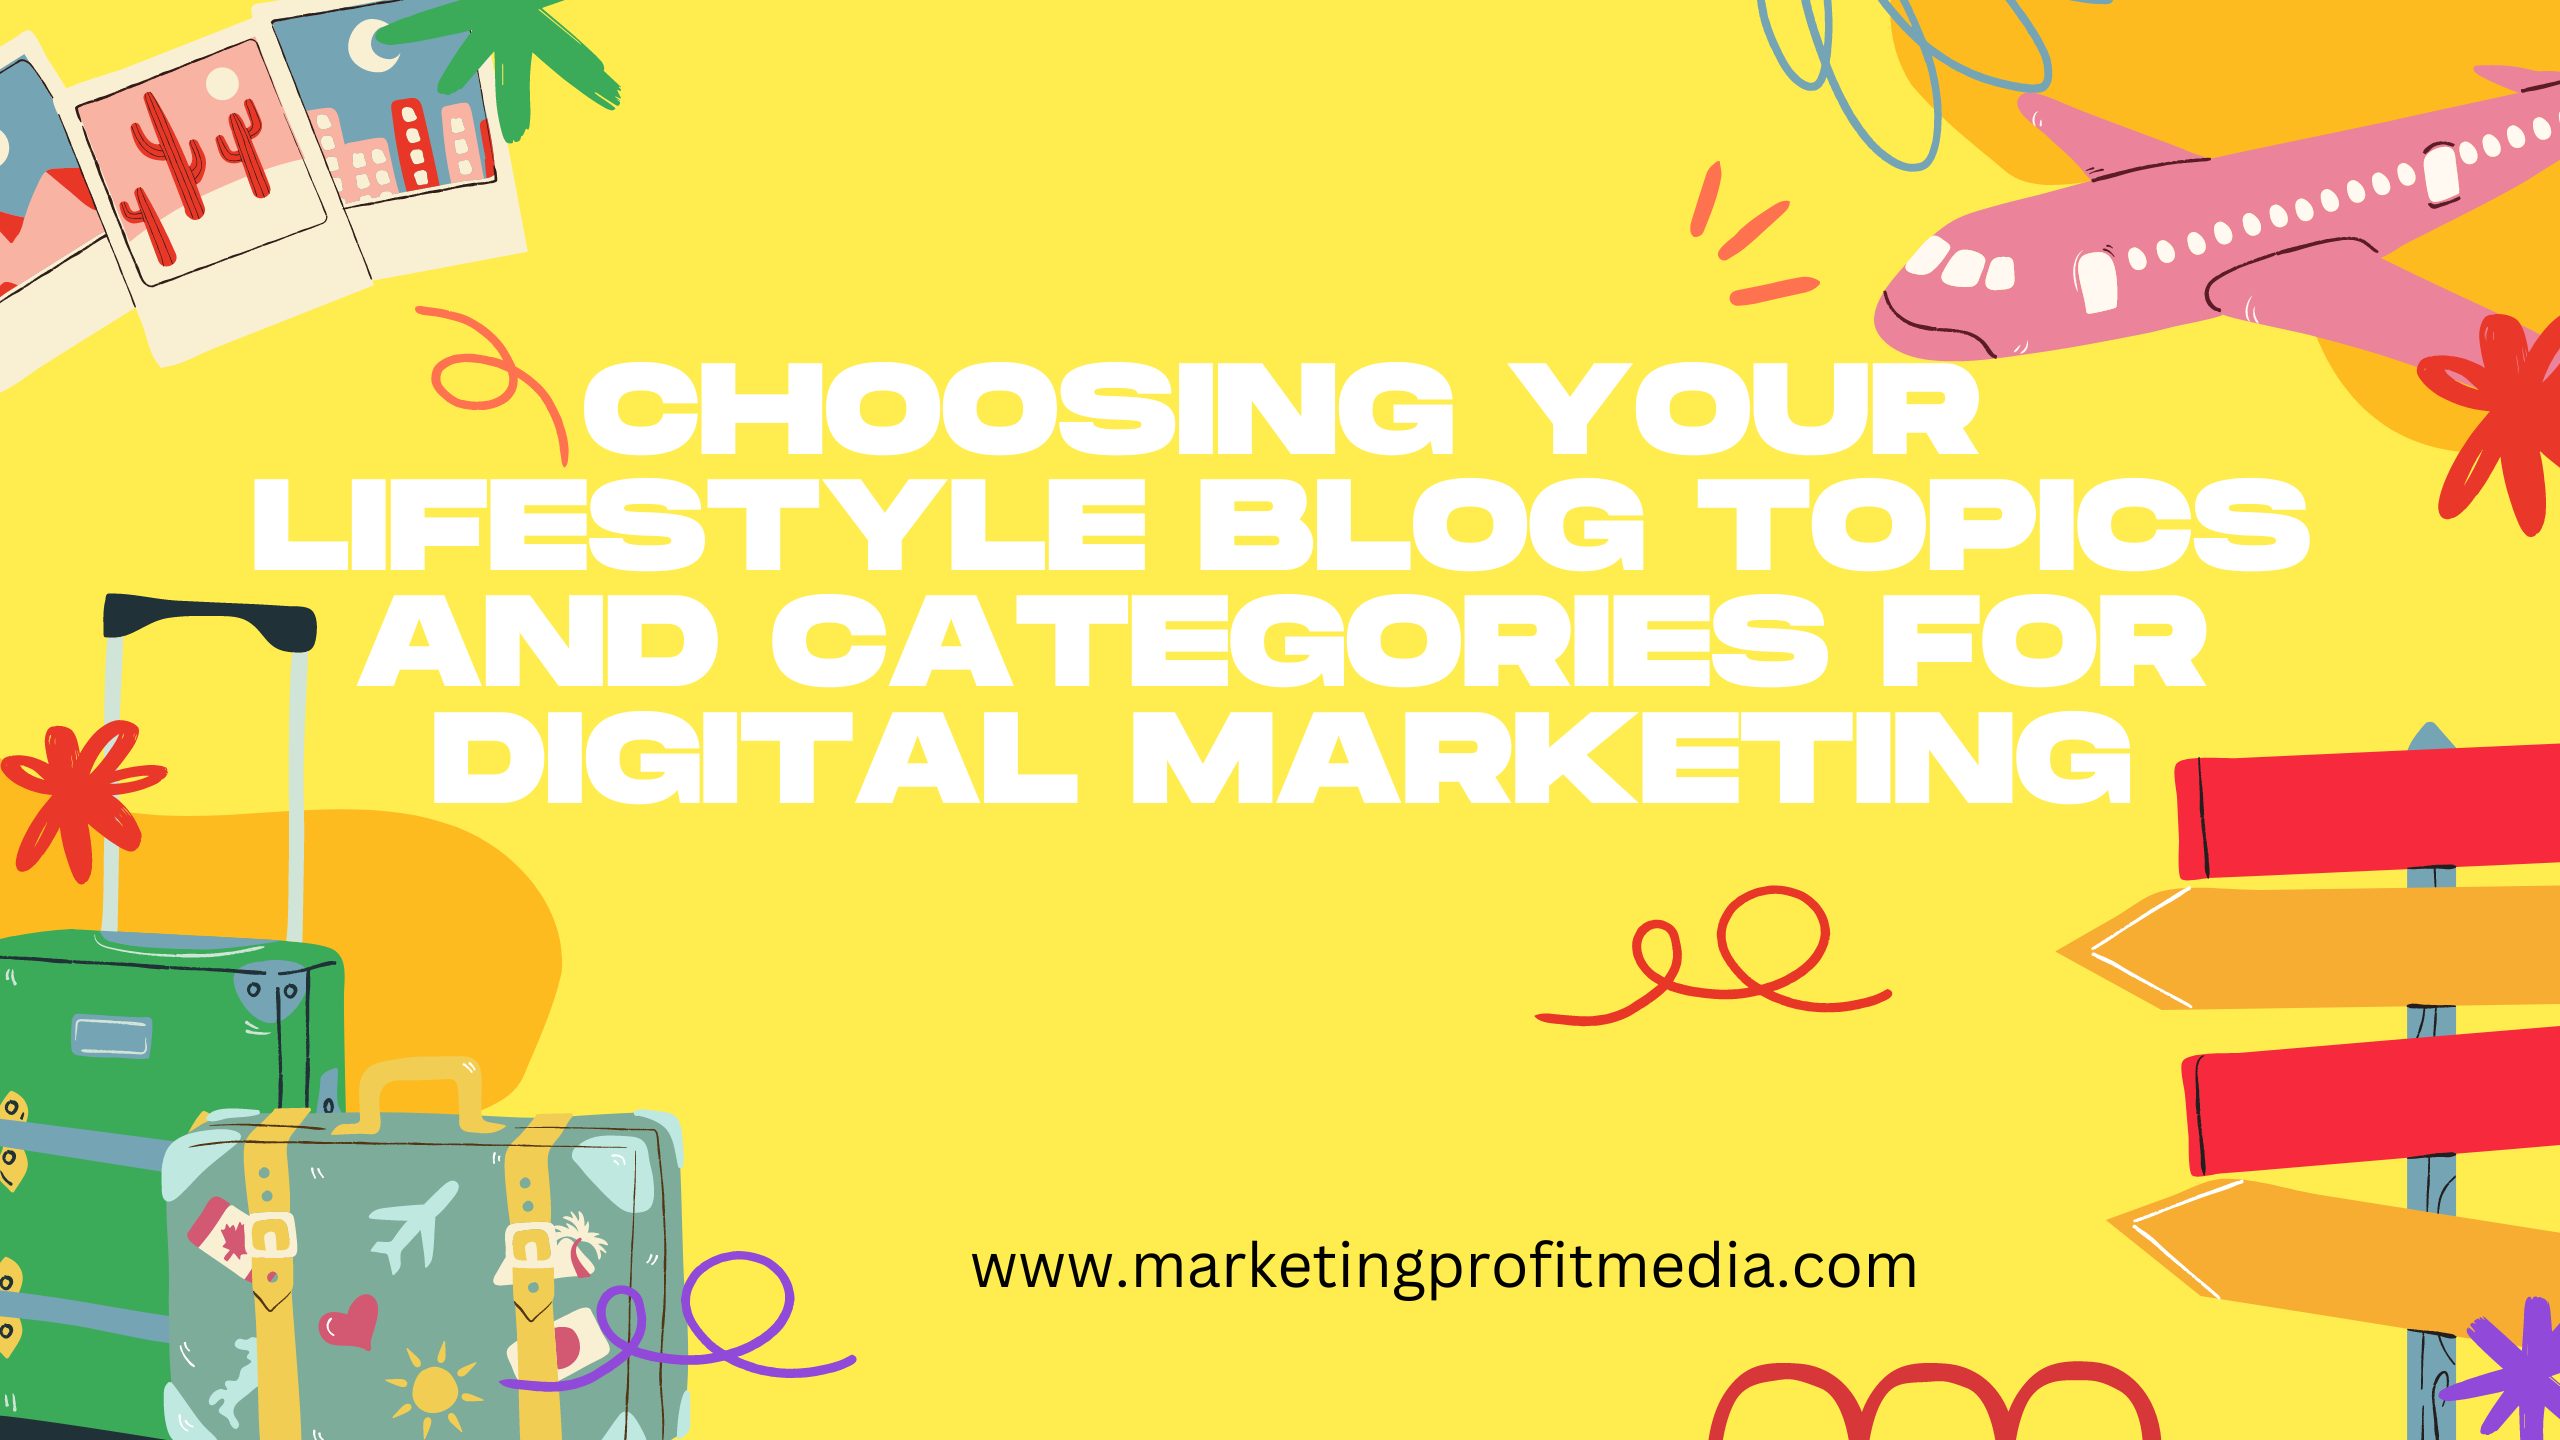 Choosing Your Lifestyle Blog Topics and Categories for Digital Marketing